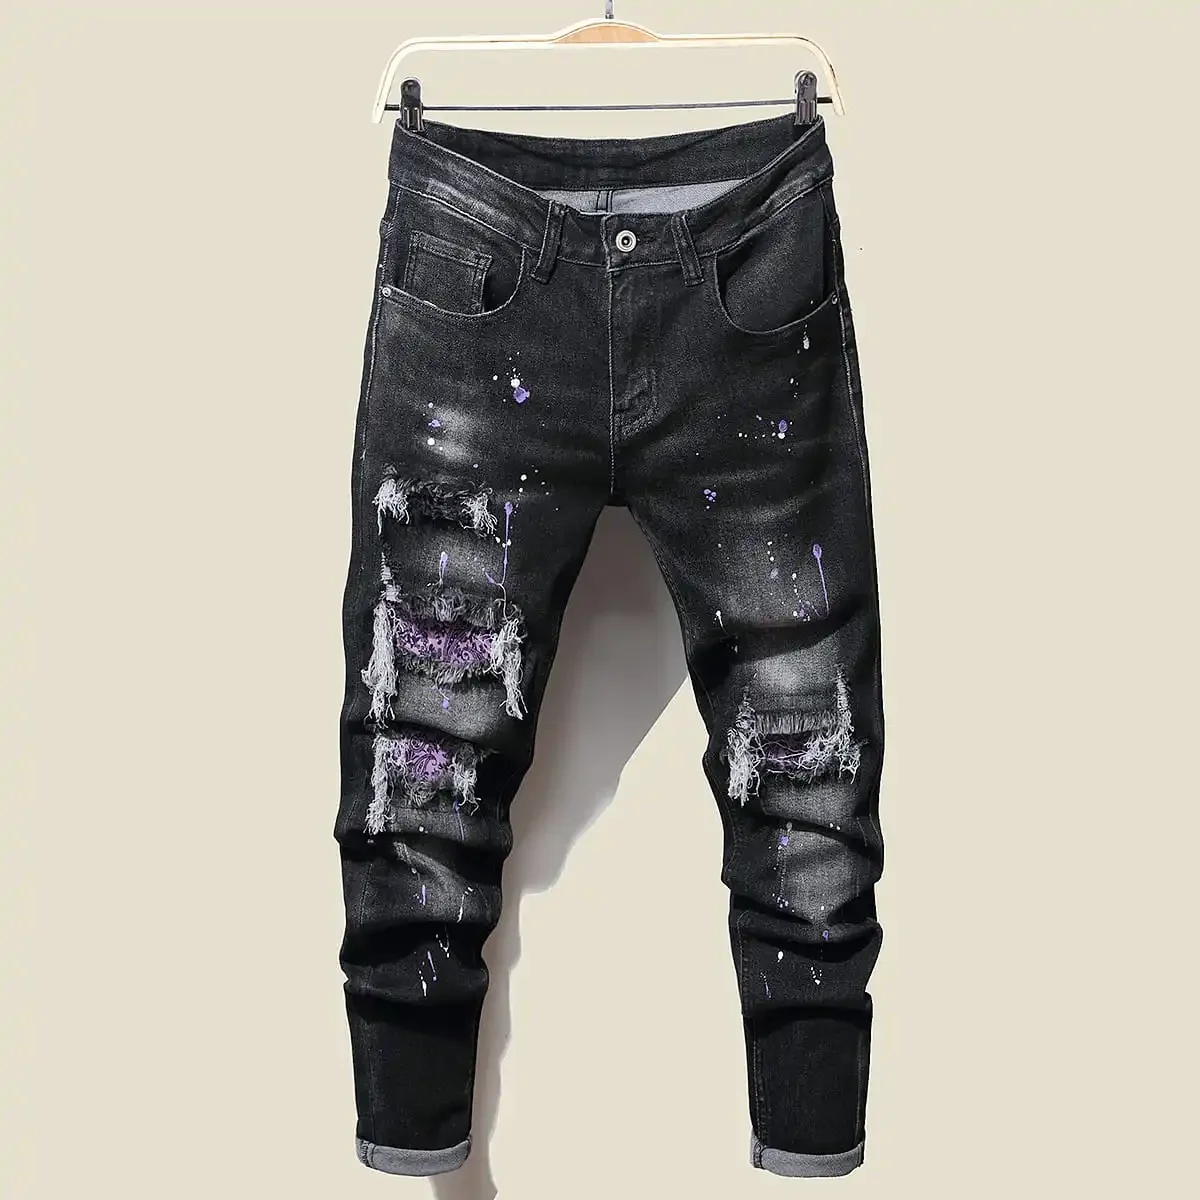 

New Men's Slim Jeans With Ripped Tassel Holes And elastic Paint Spray Black Stitching Beggar Pants men designer jeans for men